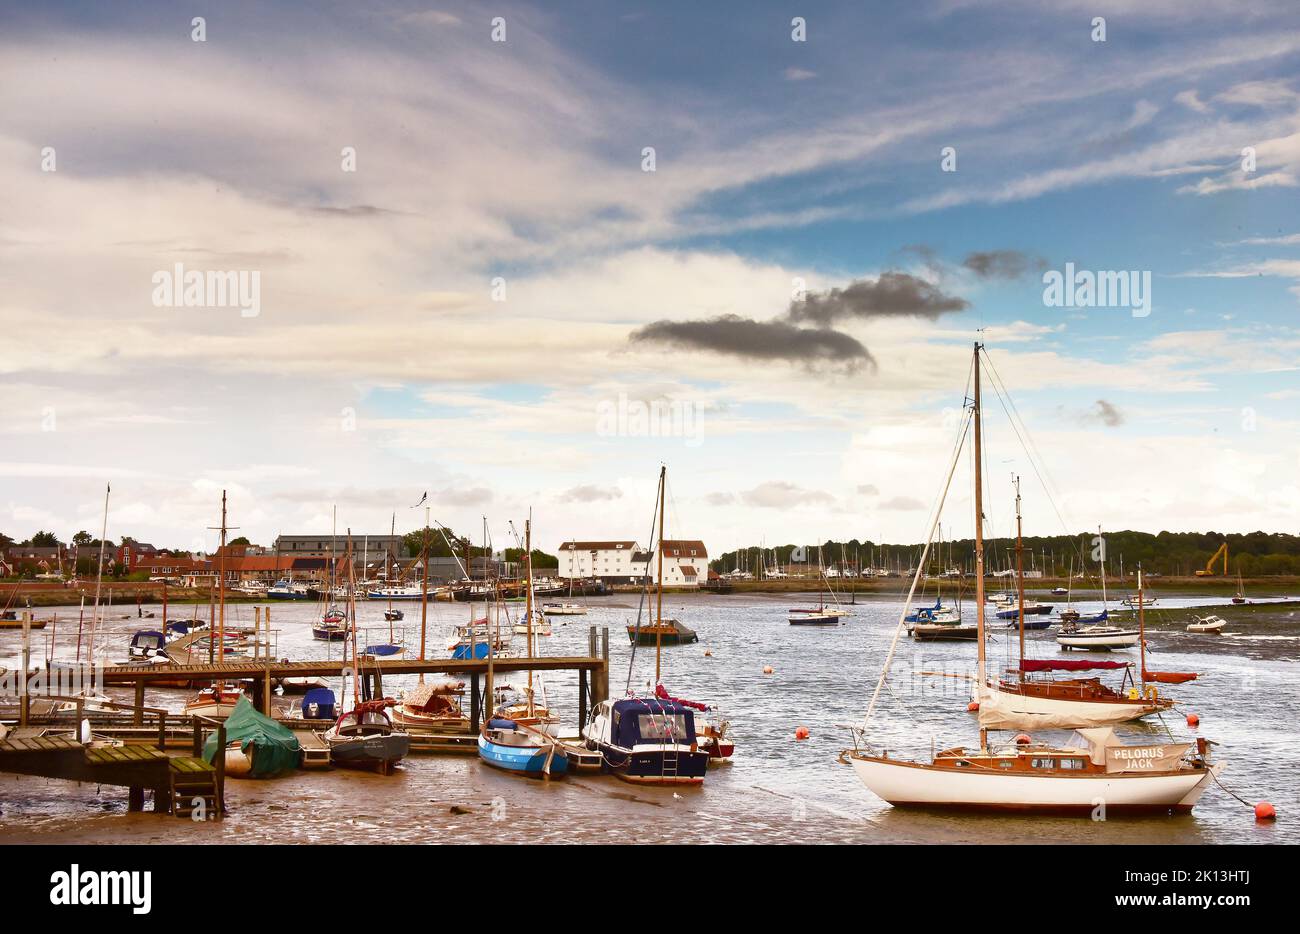 The Estuary and Harbour on the River Deben at Woodbridge, Suffolk, England with Boats Stock Photo